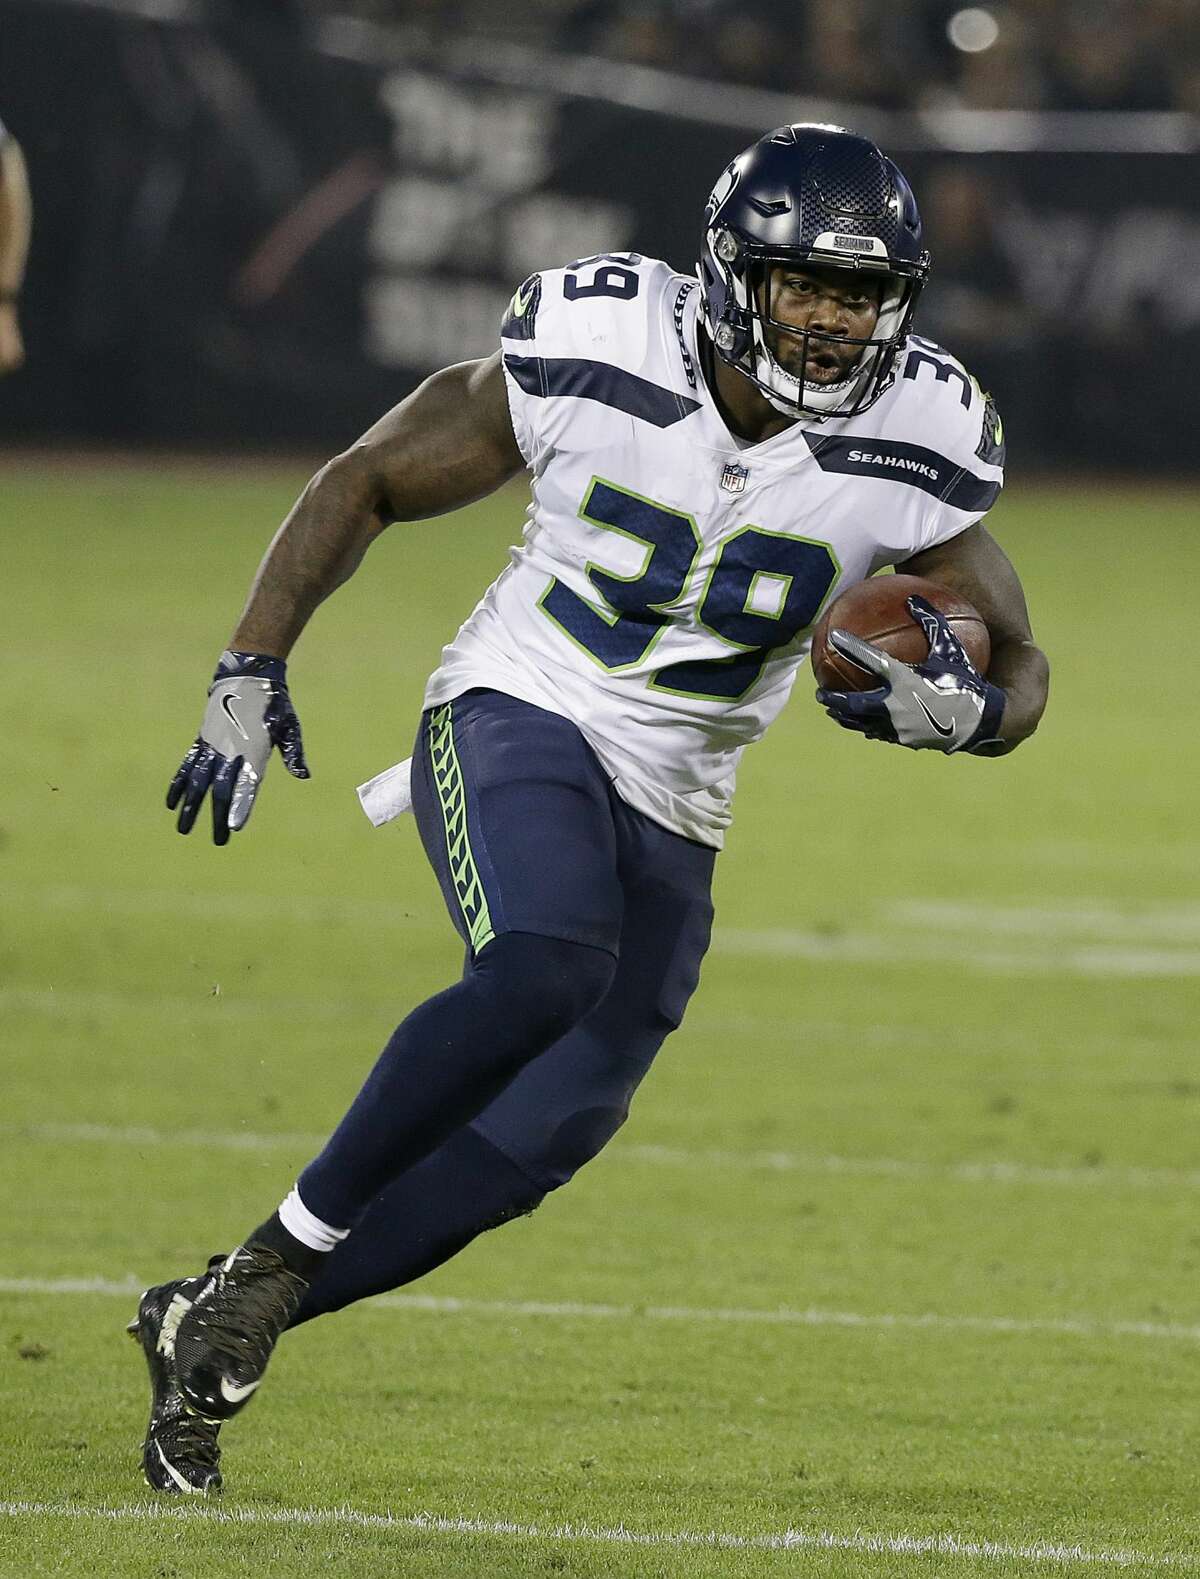 Seattle Seahawks running back Mike Davis (39) runs against the Oakland Raiders during the first half of an NFL preseason football game in Oakland, Calif., Thursday, Aug. 31, 2017. (AP Photo/Eric Risberg)